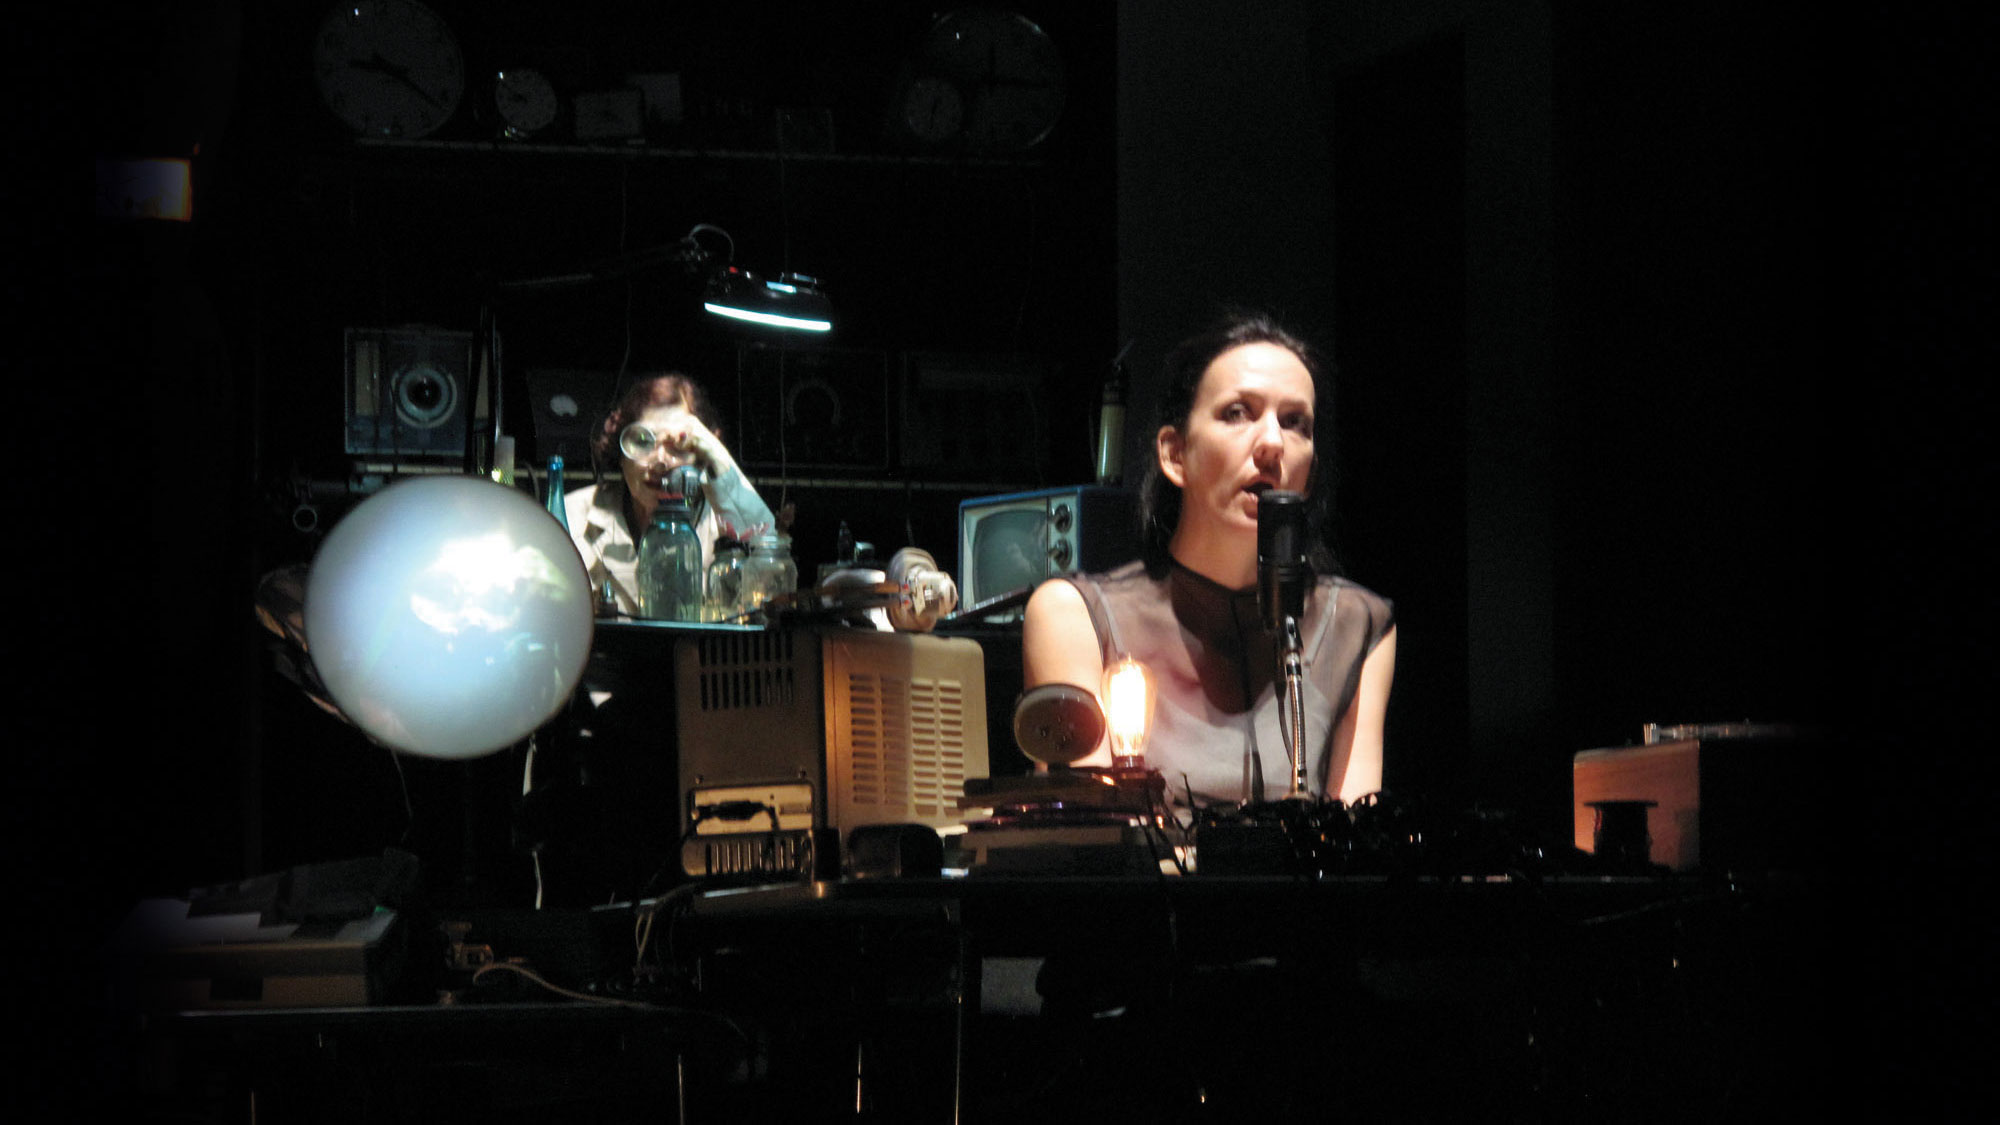 A white woman wearing a brown sleeveless top speaking into a microphone on a dark stage sounded by various vintage sound equipment silhouetted. Another woman with red hair styled in a 50's style sits behind her looking through a magnifying glass at glass jars set in front of her. 